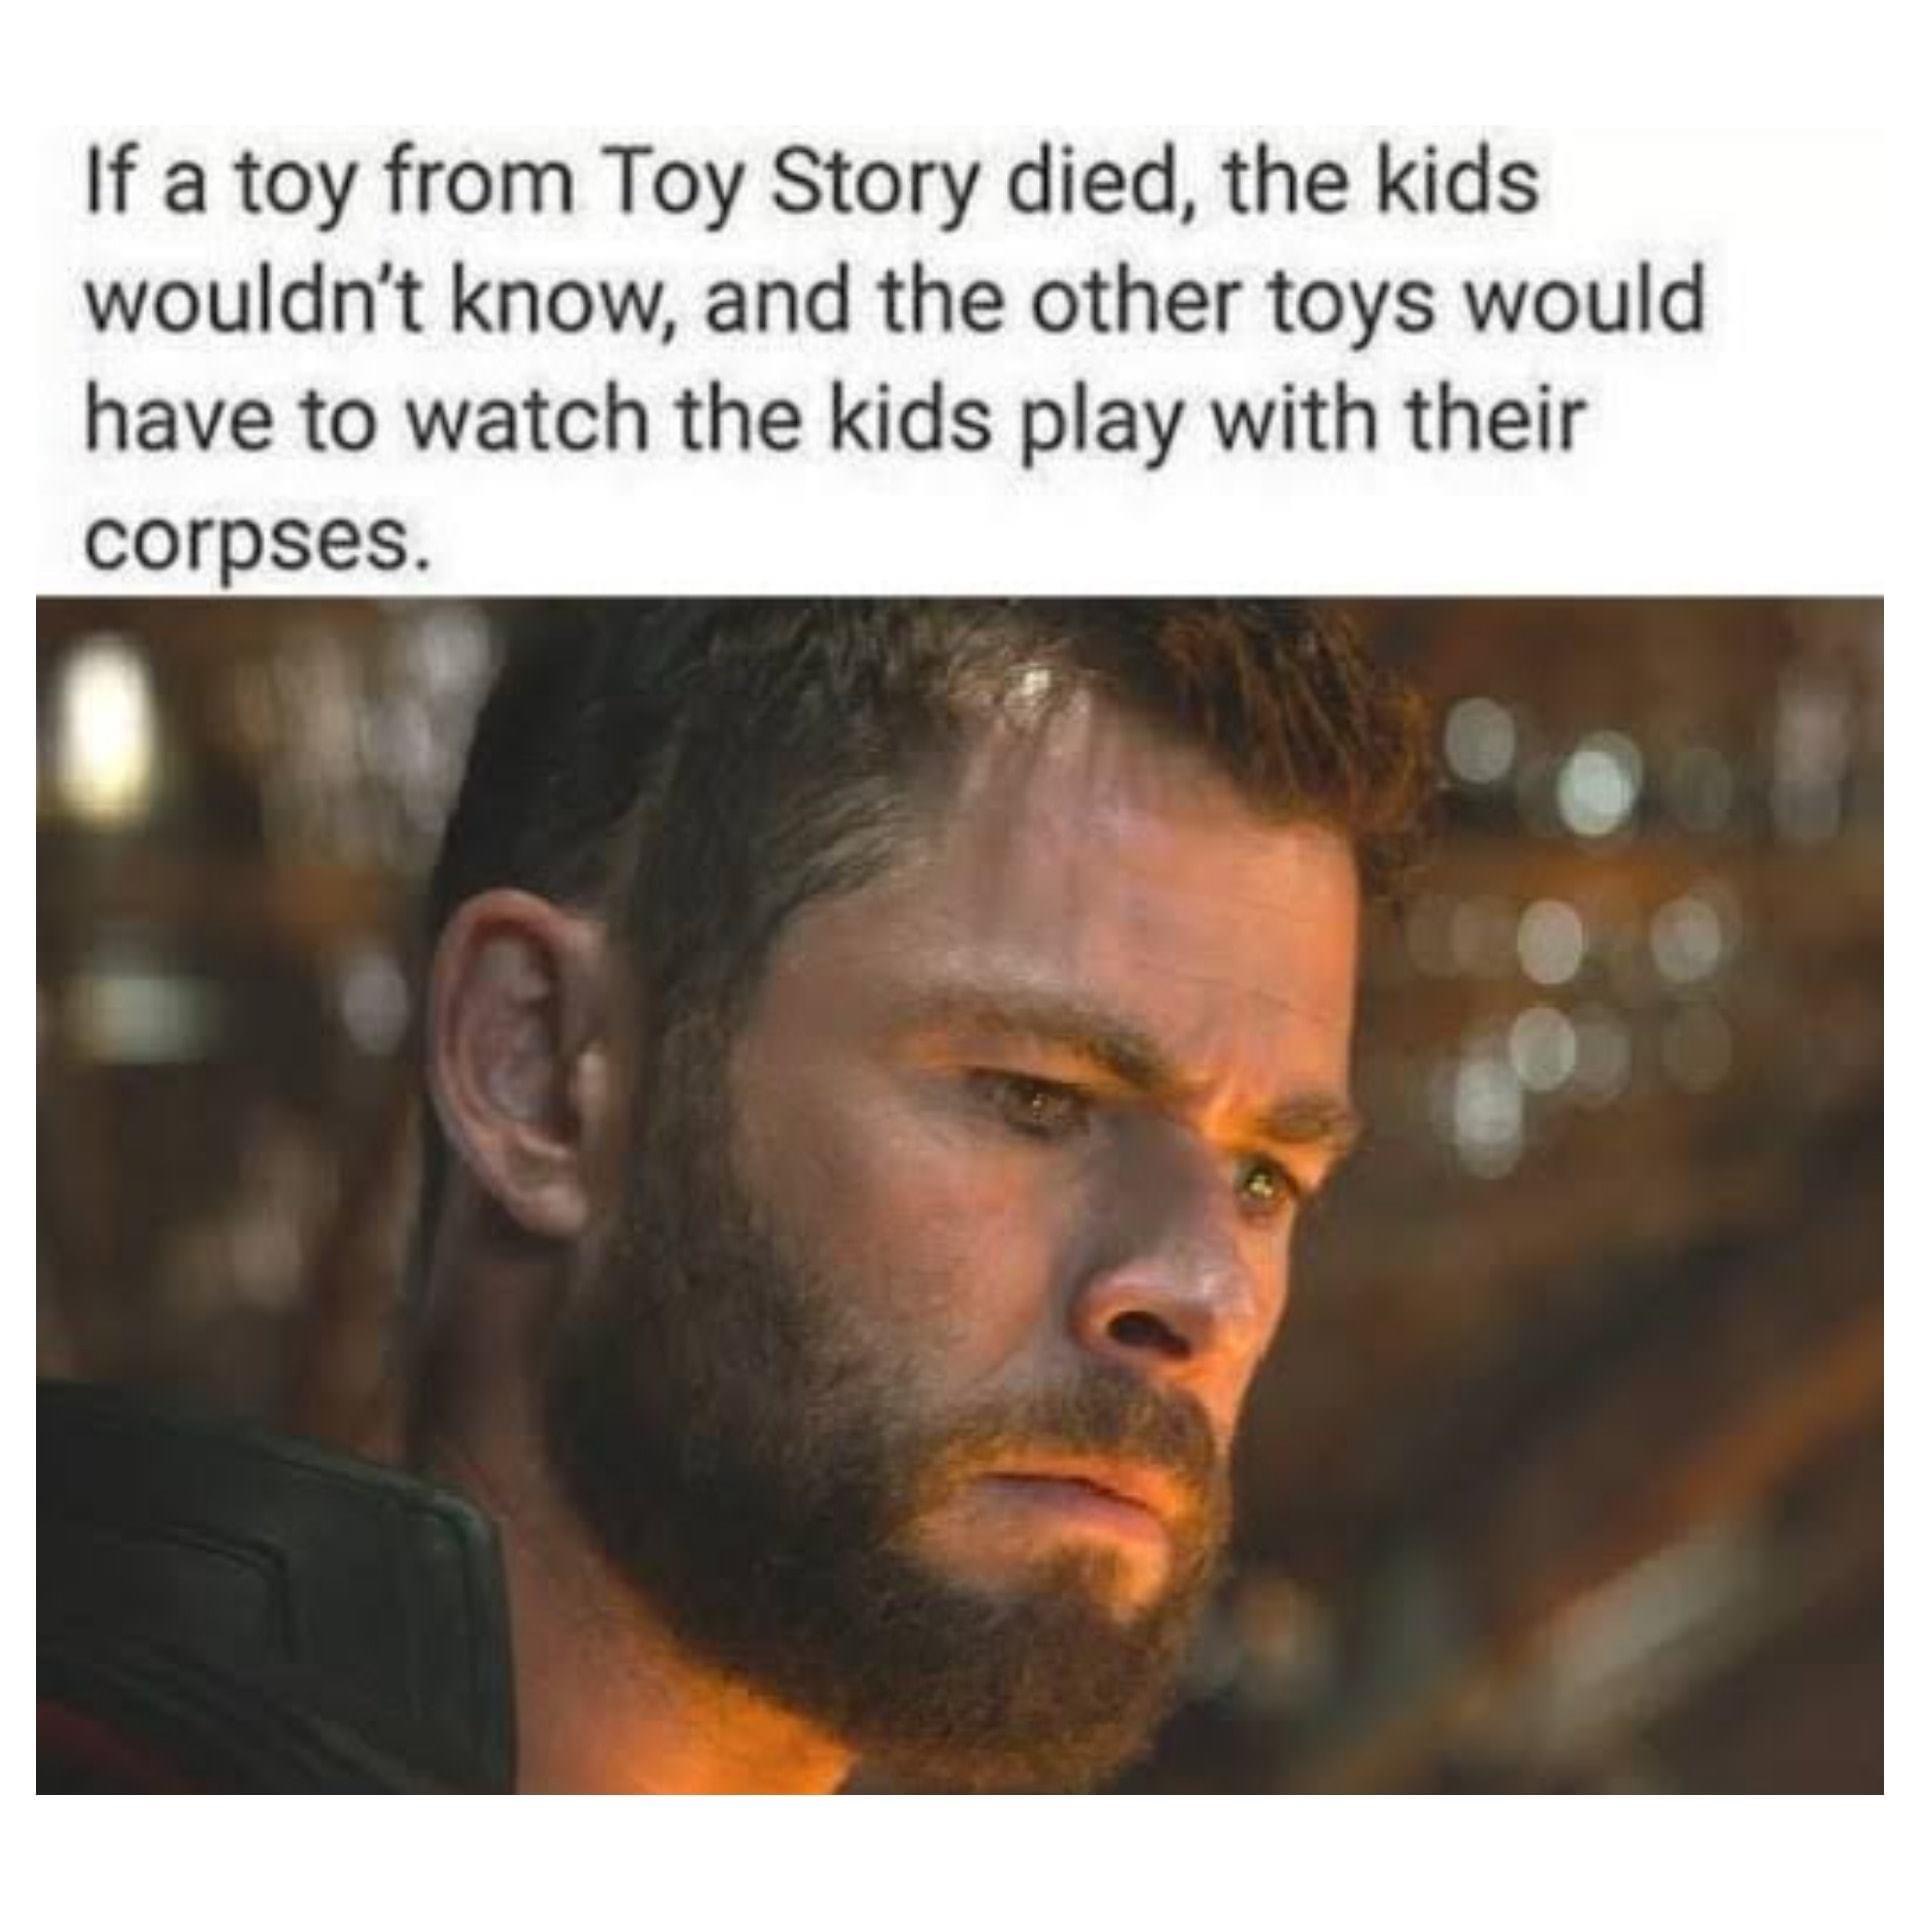 thor endgame eyes - If a toy from Toy Story died, the kids wouldn't know, and the other toys would have to watch the kids play with their corpses.